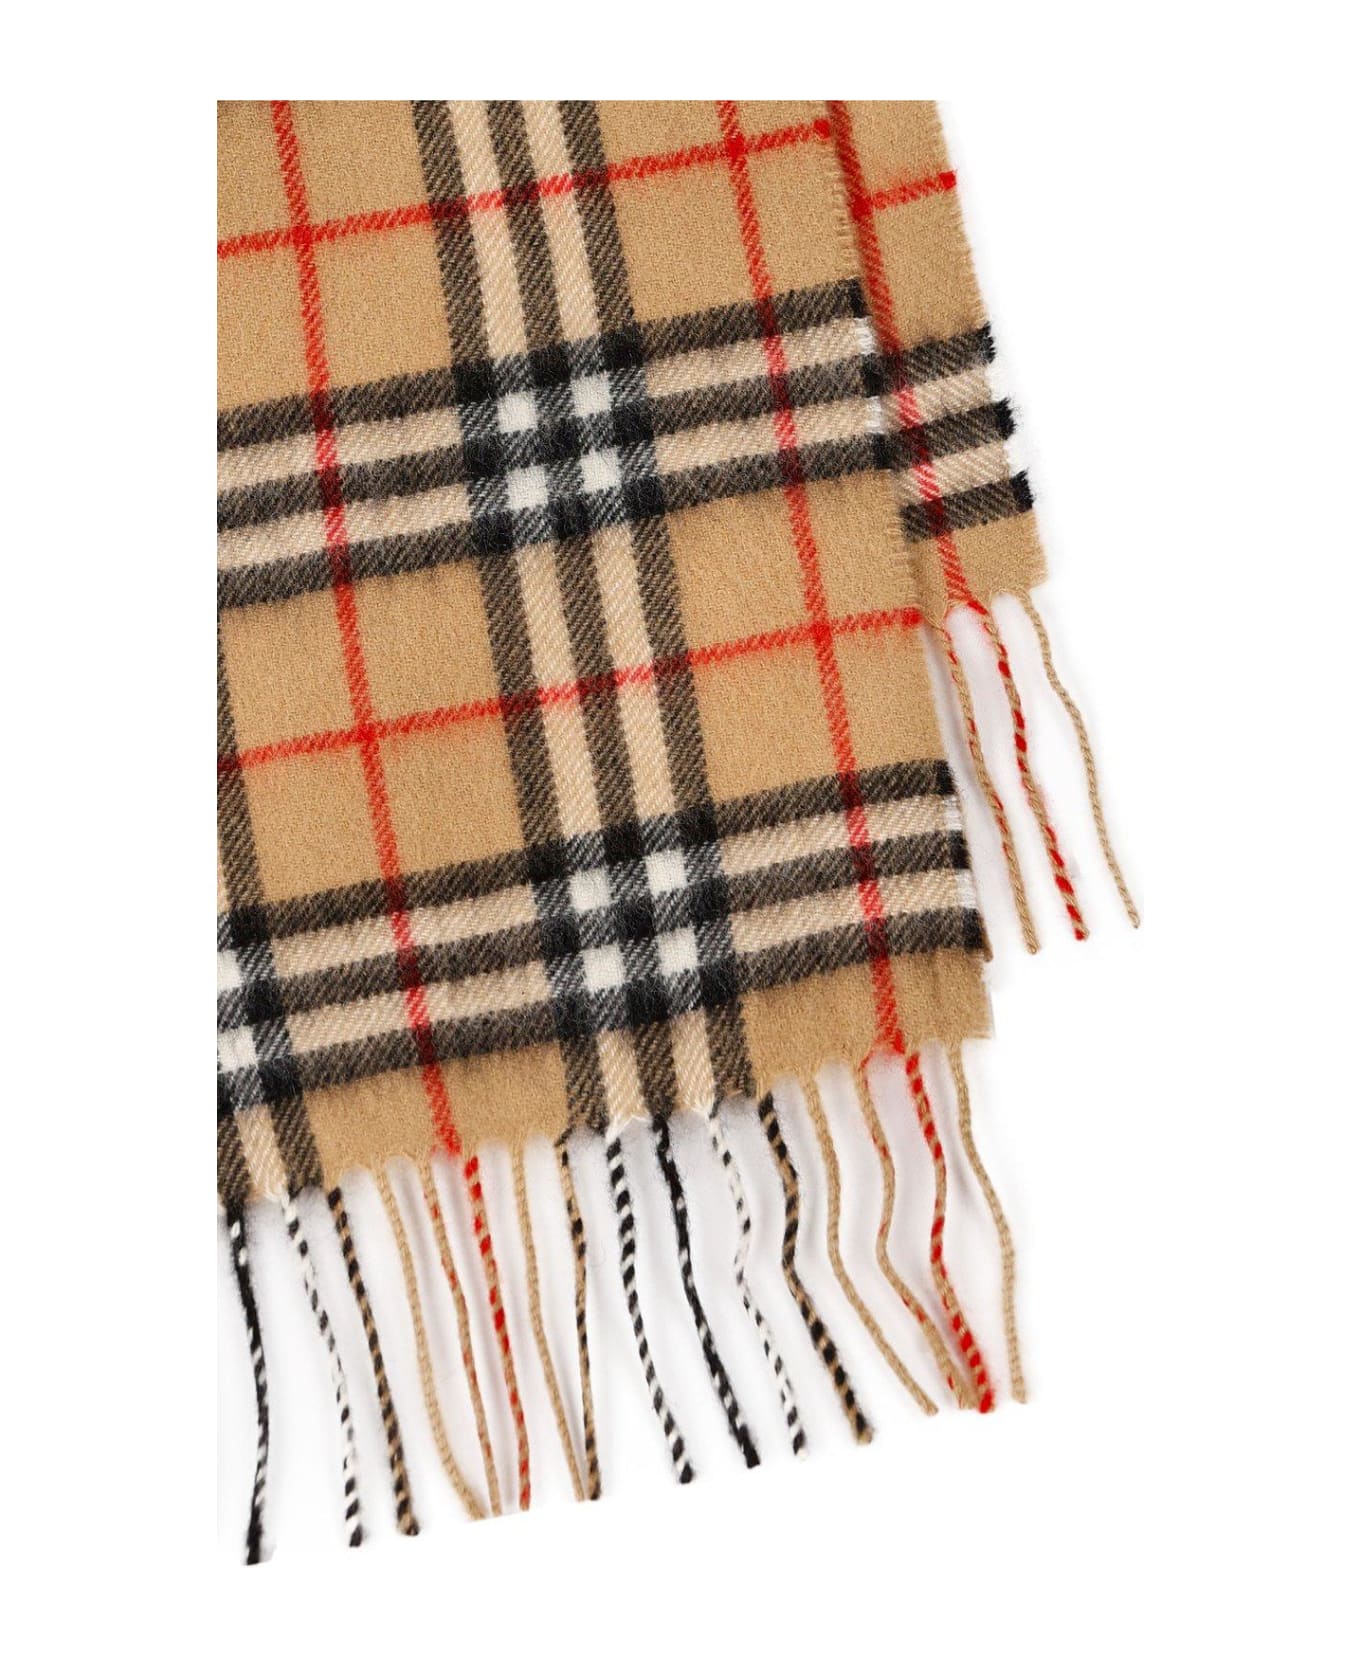 Burberry Checked Fringed Scarf - Archive beige アクセサリー＆ギフト